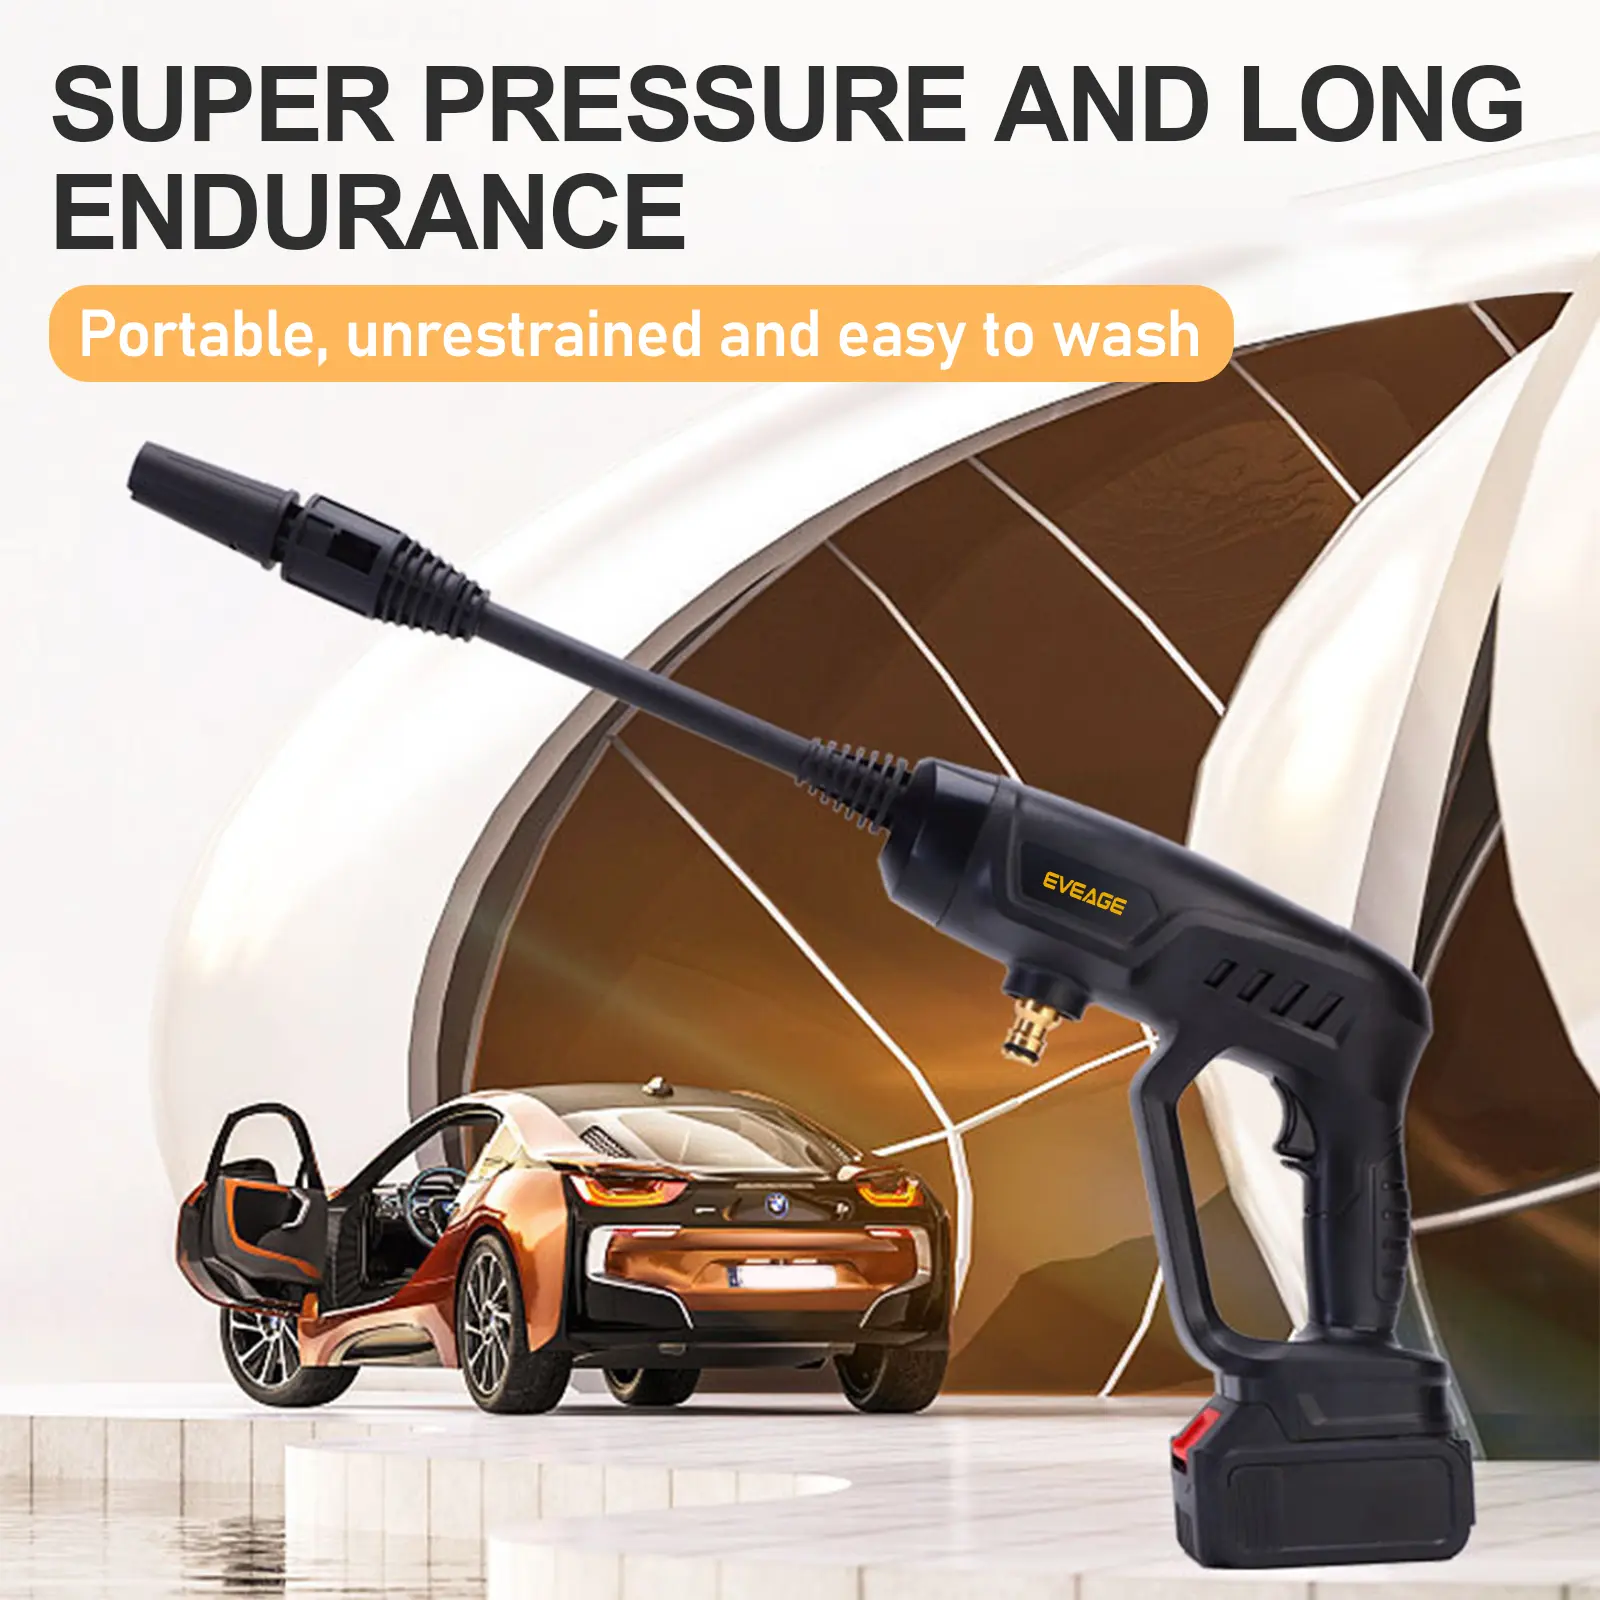 cordless electric power washer